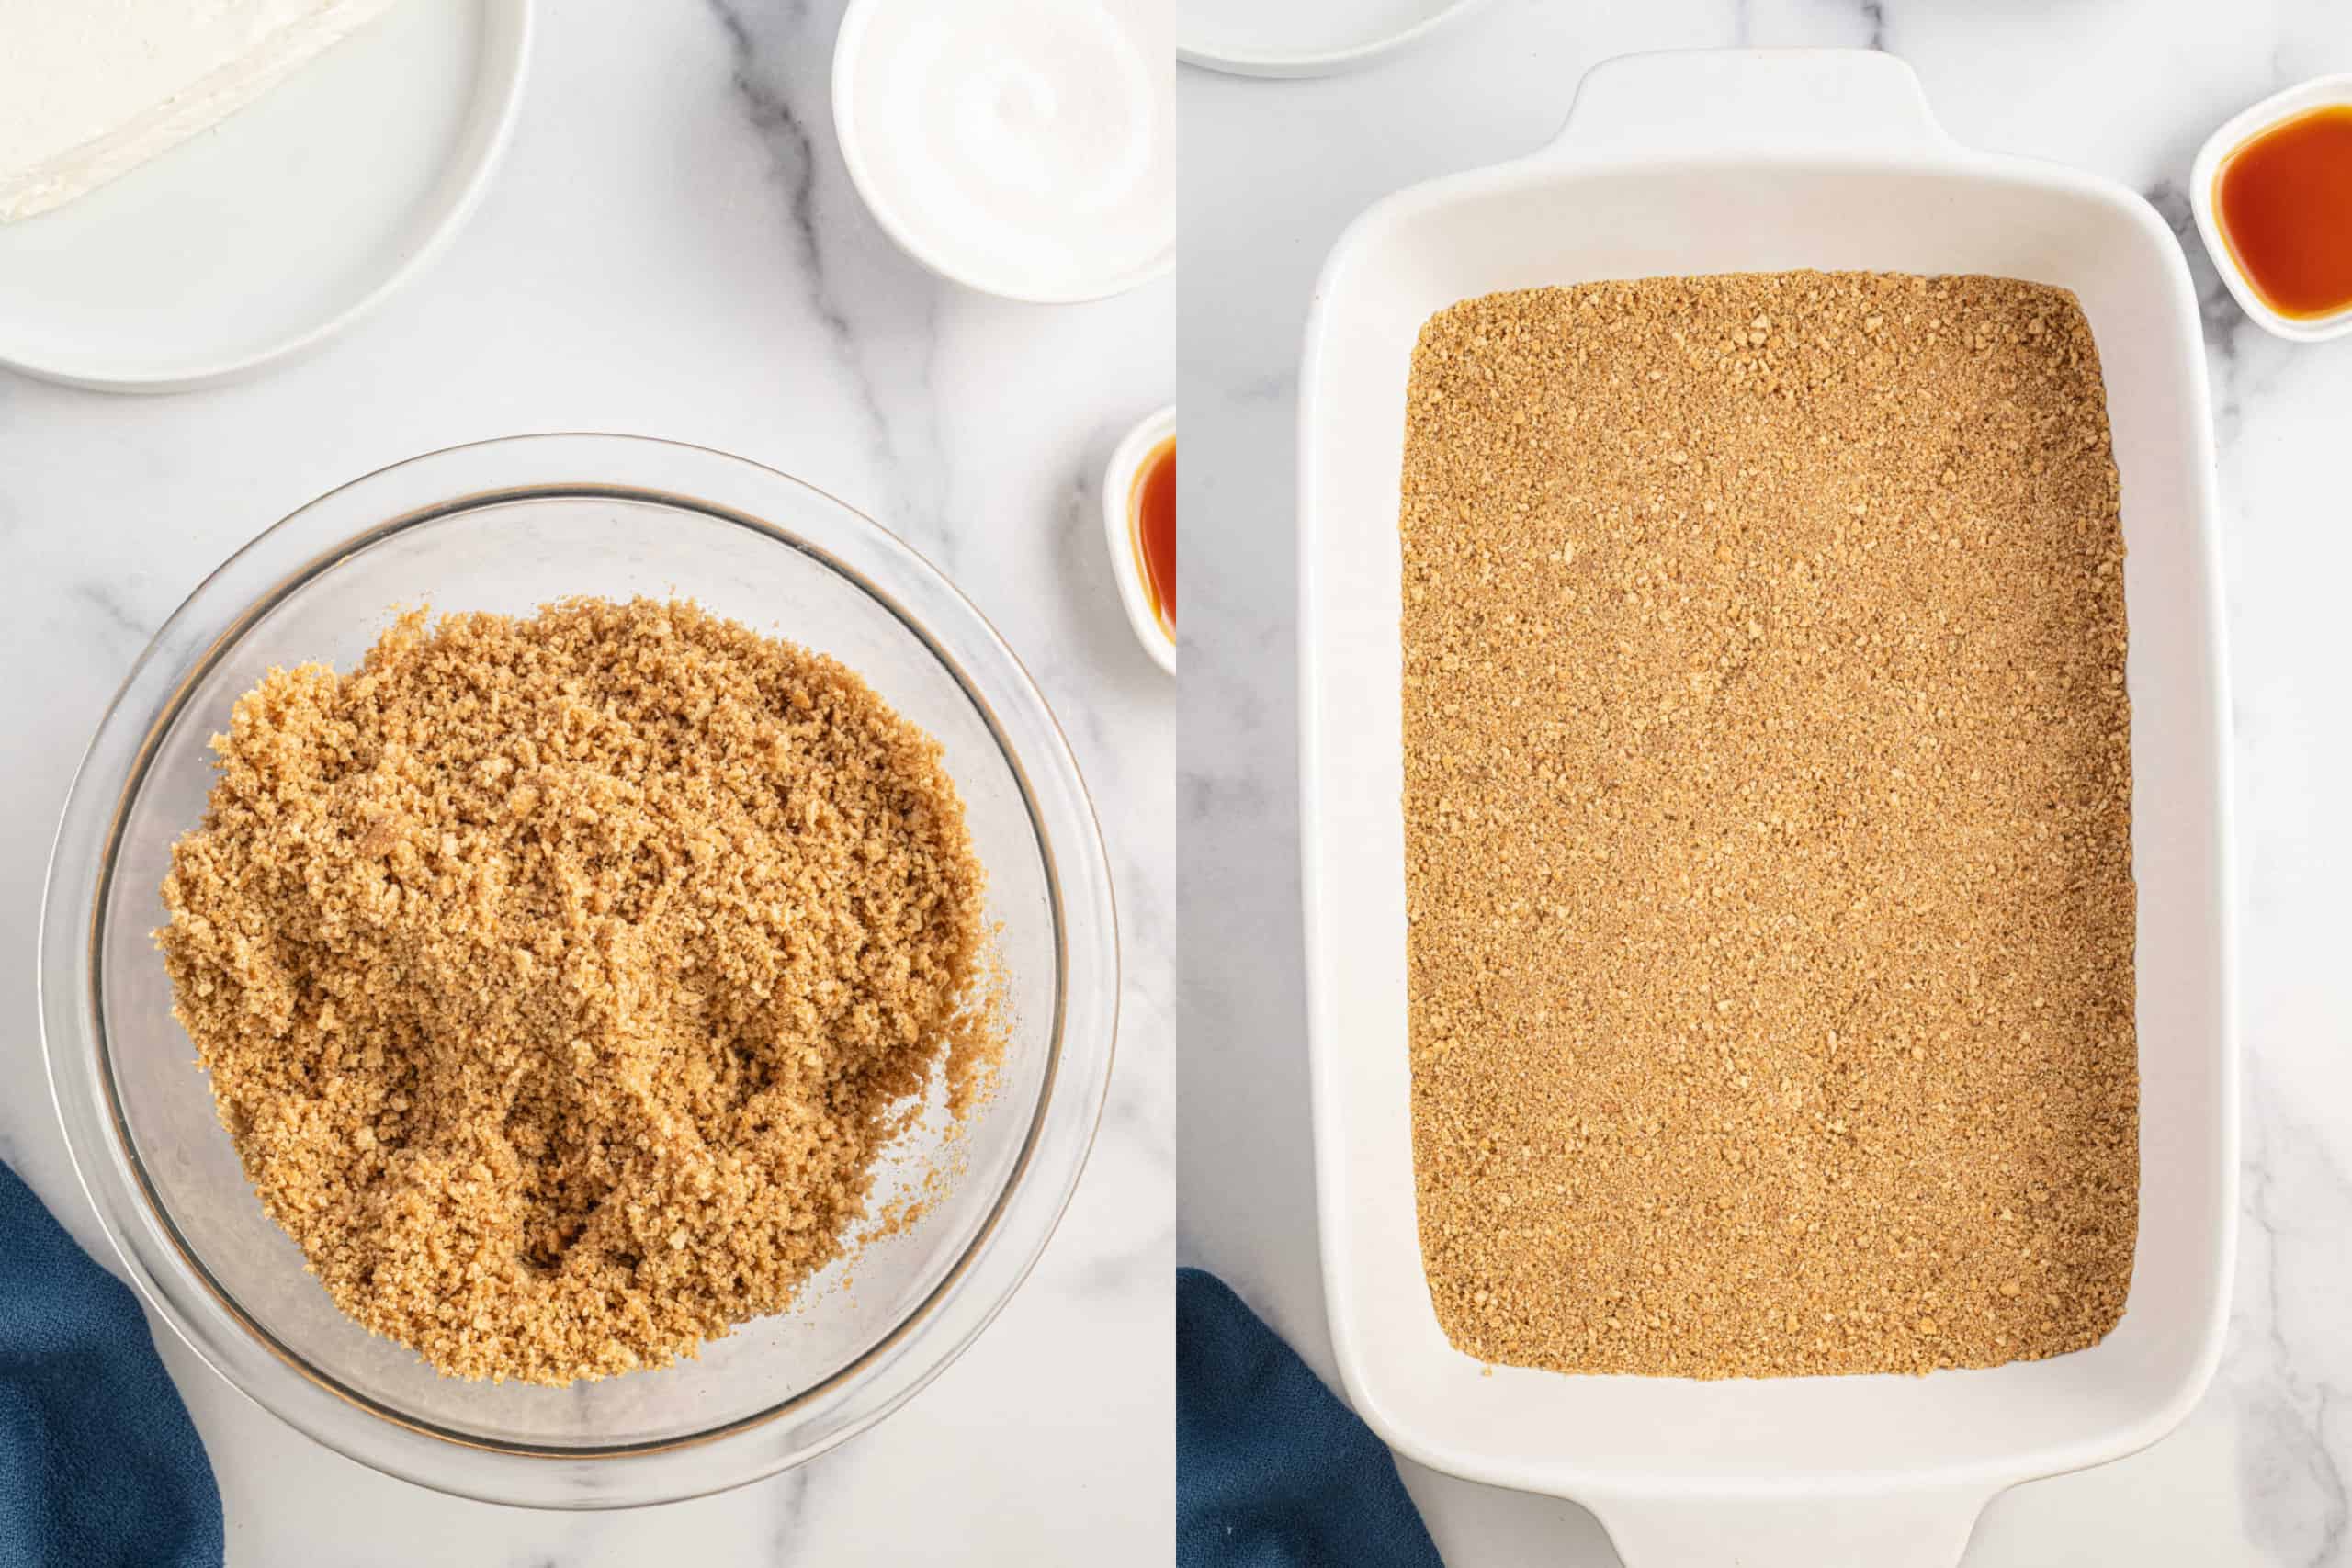 Step by step photos showing how to make graham cracker crust for apple delight.